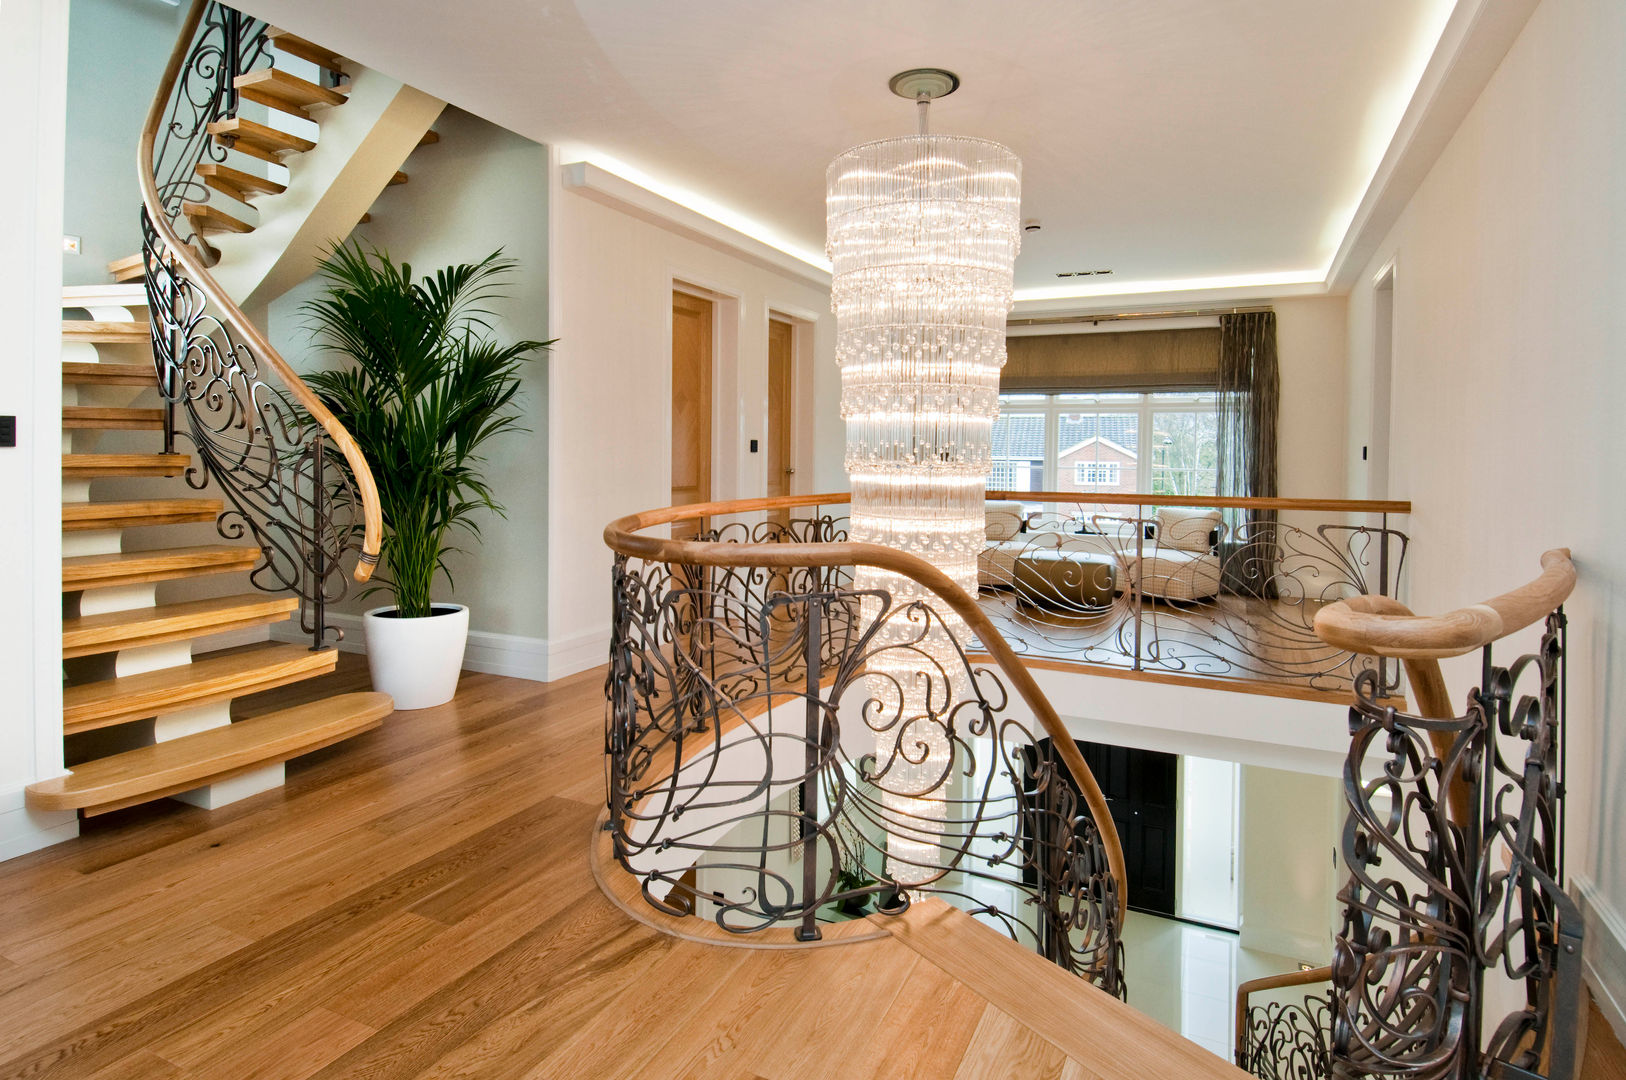 BESPOKE CHANDELIER AND STAIRCASE Shandler Homes Ltd Couloir, entrée, escaliers modernes